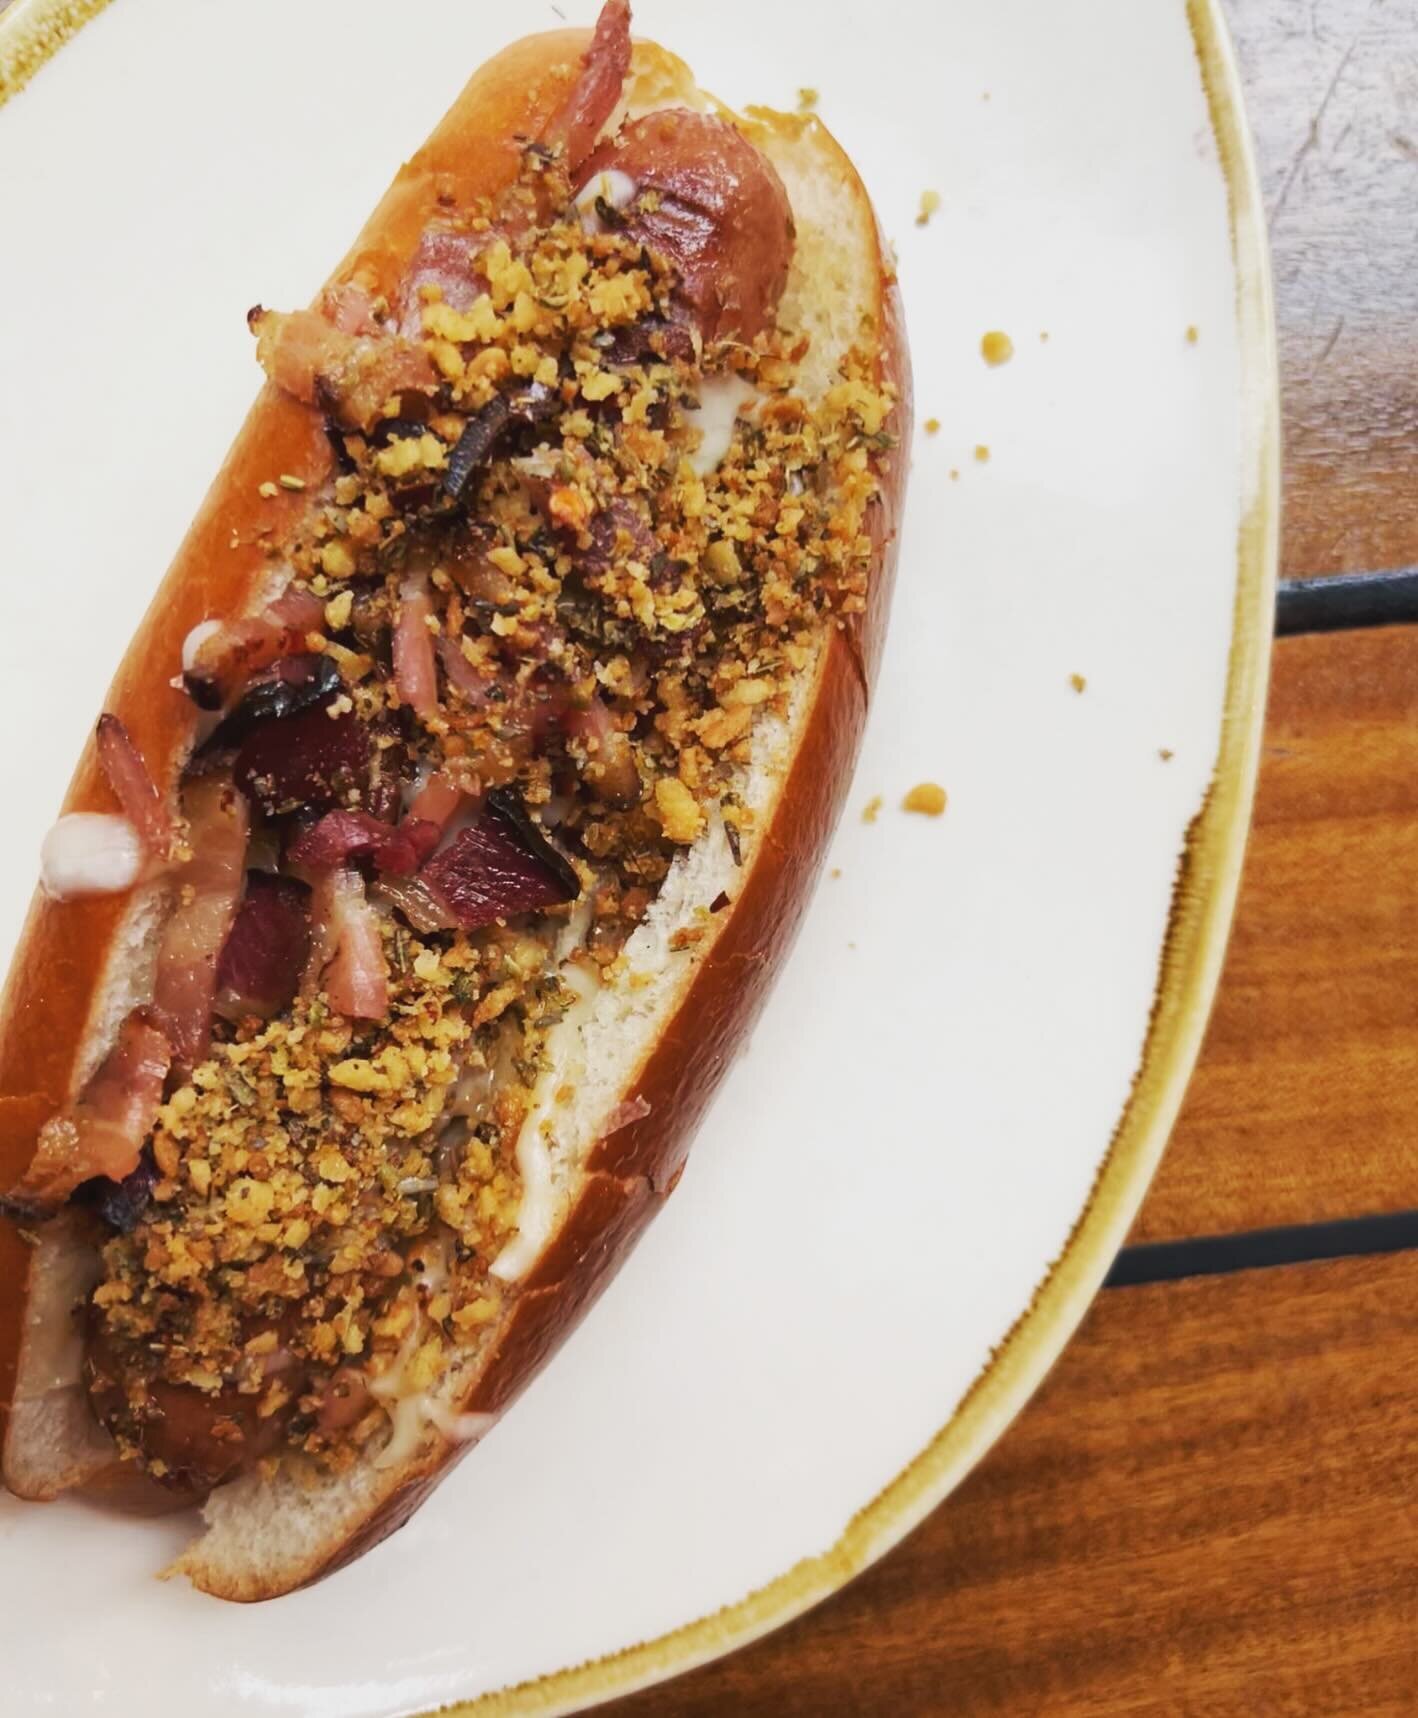 The final #loveweins of February... the Queen of Hearts! Every dog has his day and this one won the jackpot with bacon, buttery breadcrumbs, and Monterey Jack. Call it Weins Casino -- we call it a winning hand. 

#weinerwednesday #royalflush #lovewei